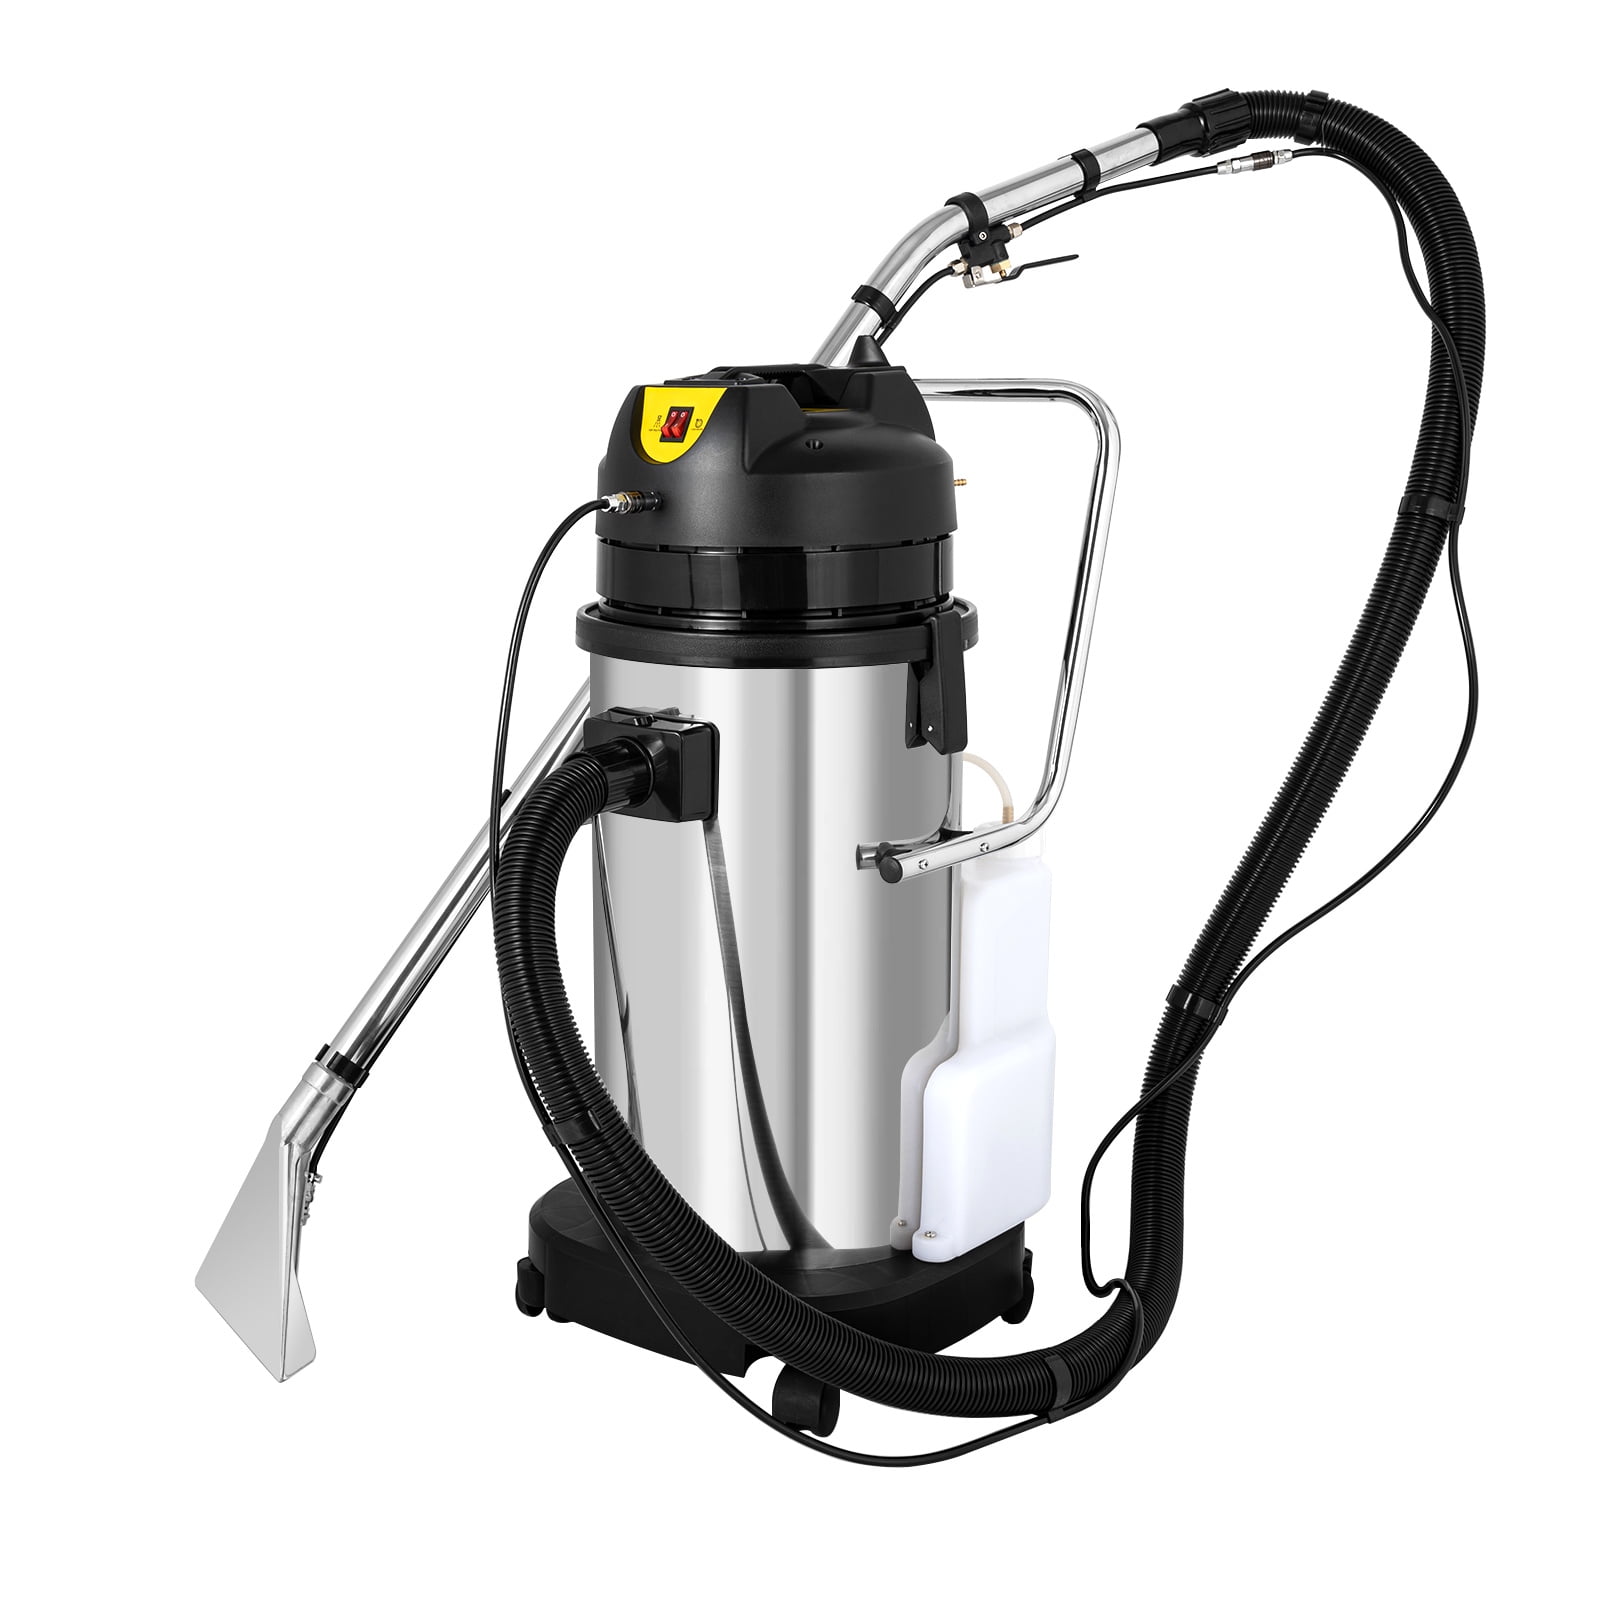 40L/10.5Gallon Multifunctional 3-in One Carpet Cleaner Machine - Dust  Suction, Water Absorption, Water Cleaning, Professional Carpet Cleaning